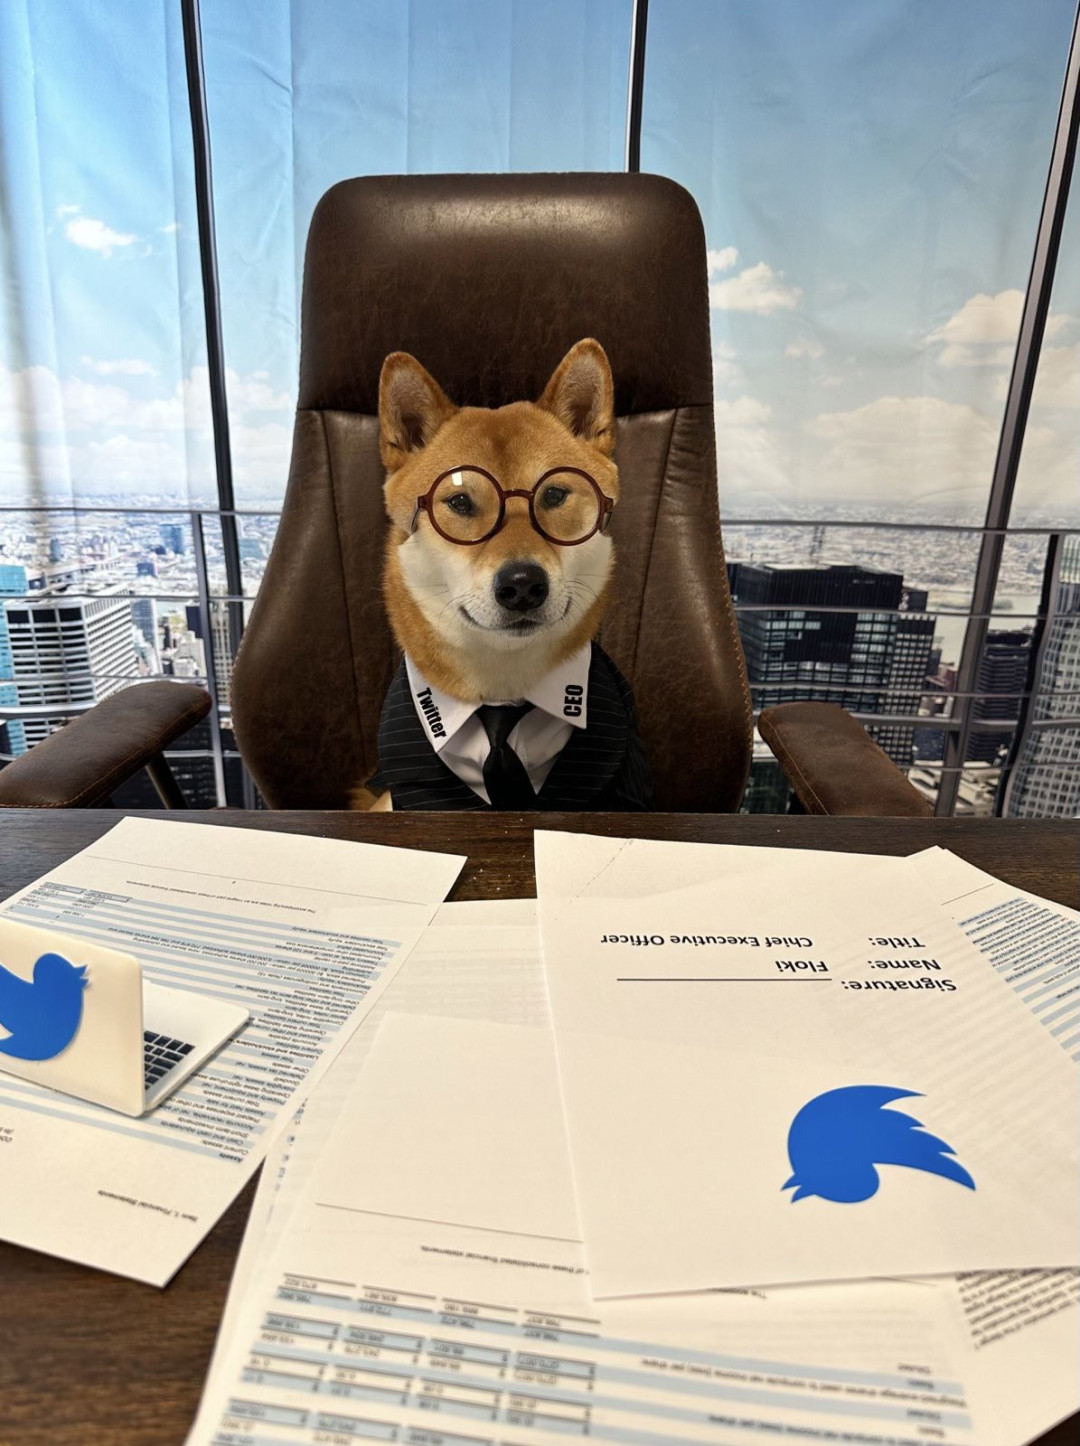 Elon Musk makes his dog the new CEO of Twitter